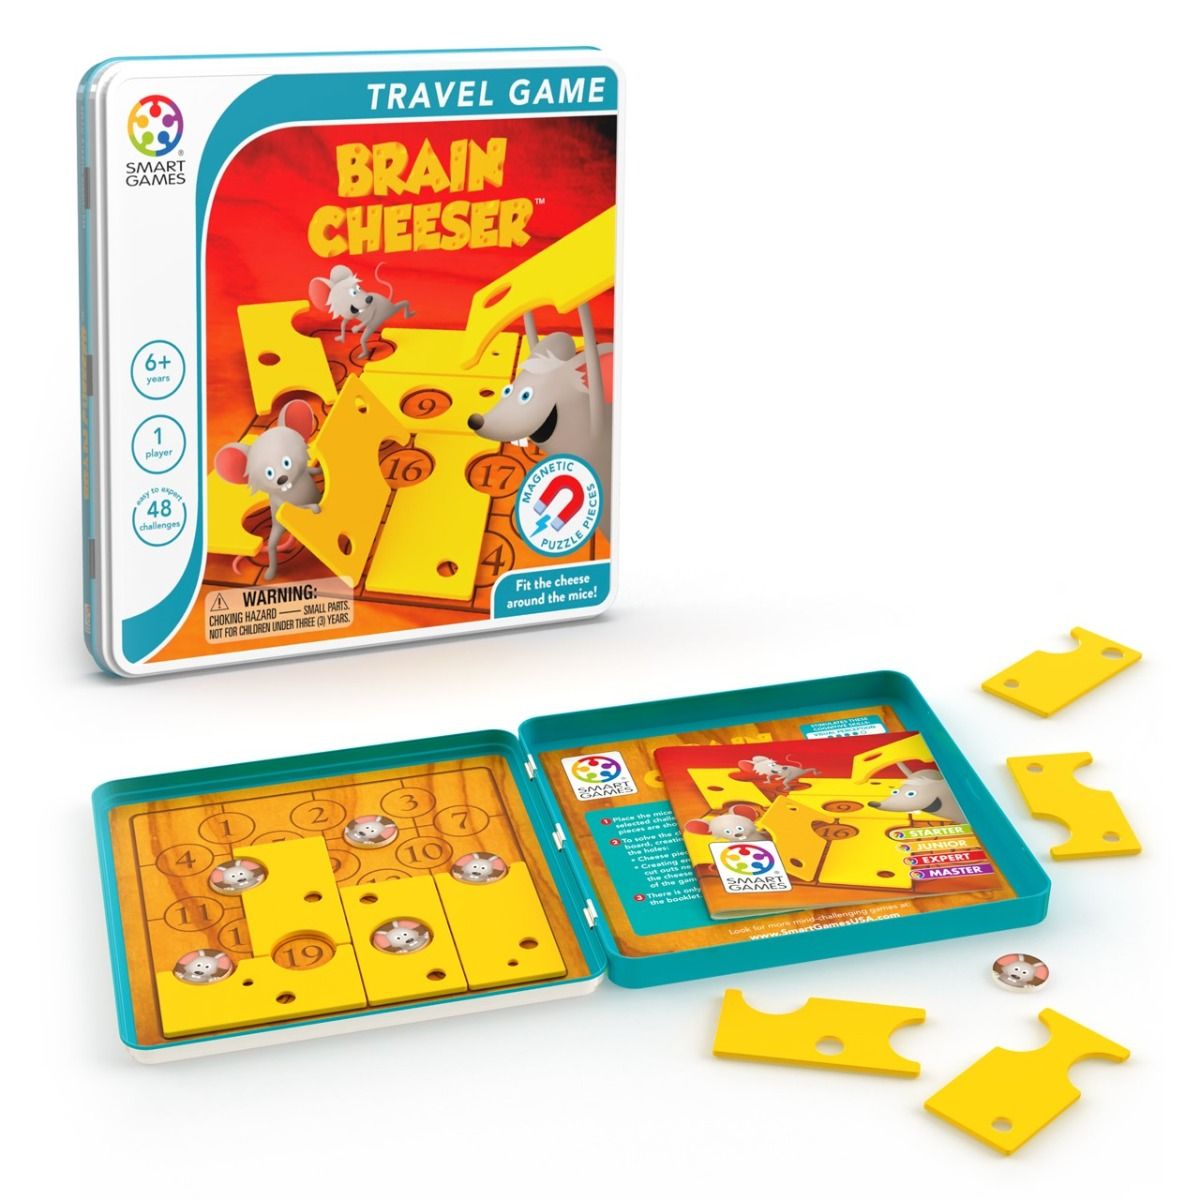 Smart Toys & Games-Brain Cheeser Travel Game-SGT2500US-Legacy Toys